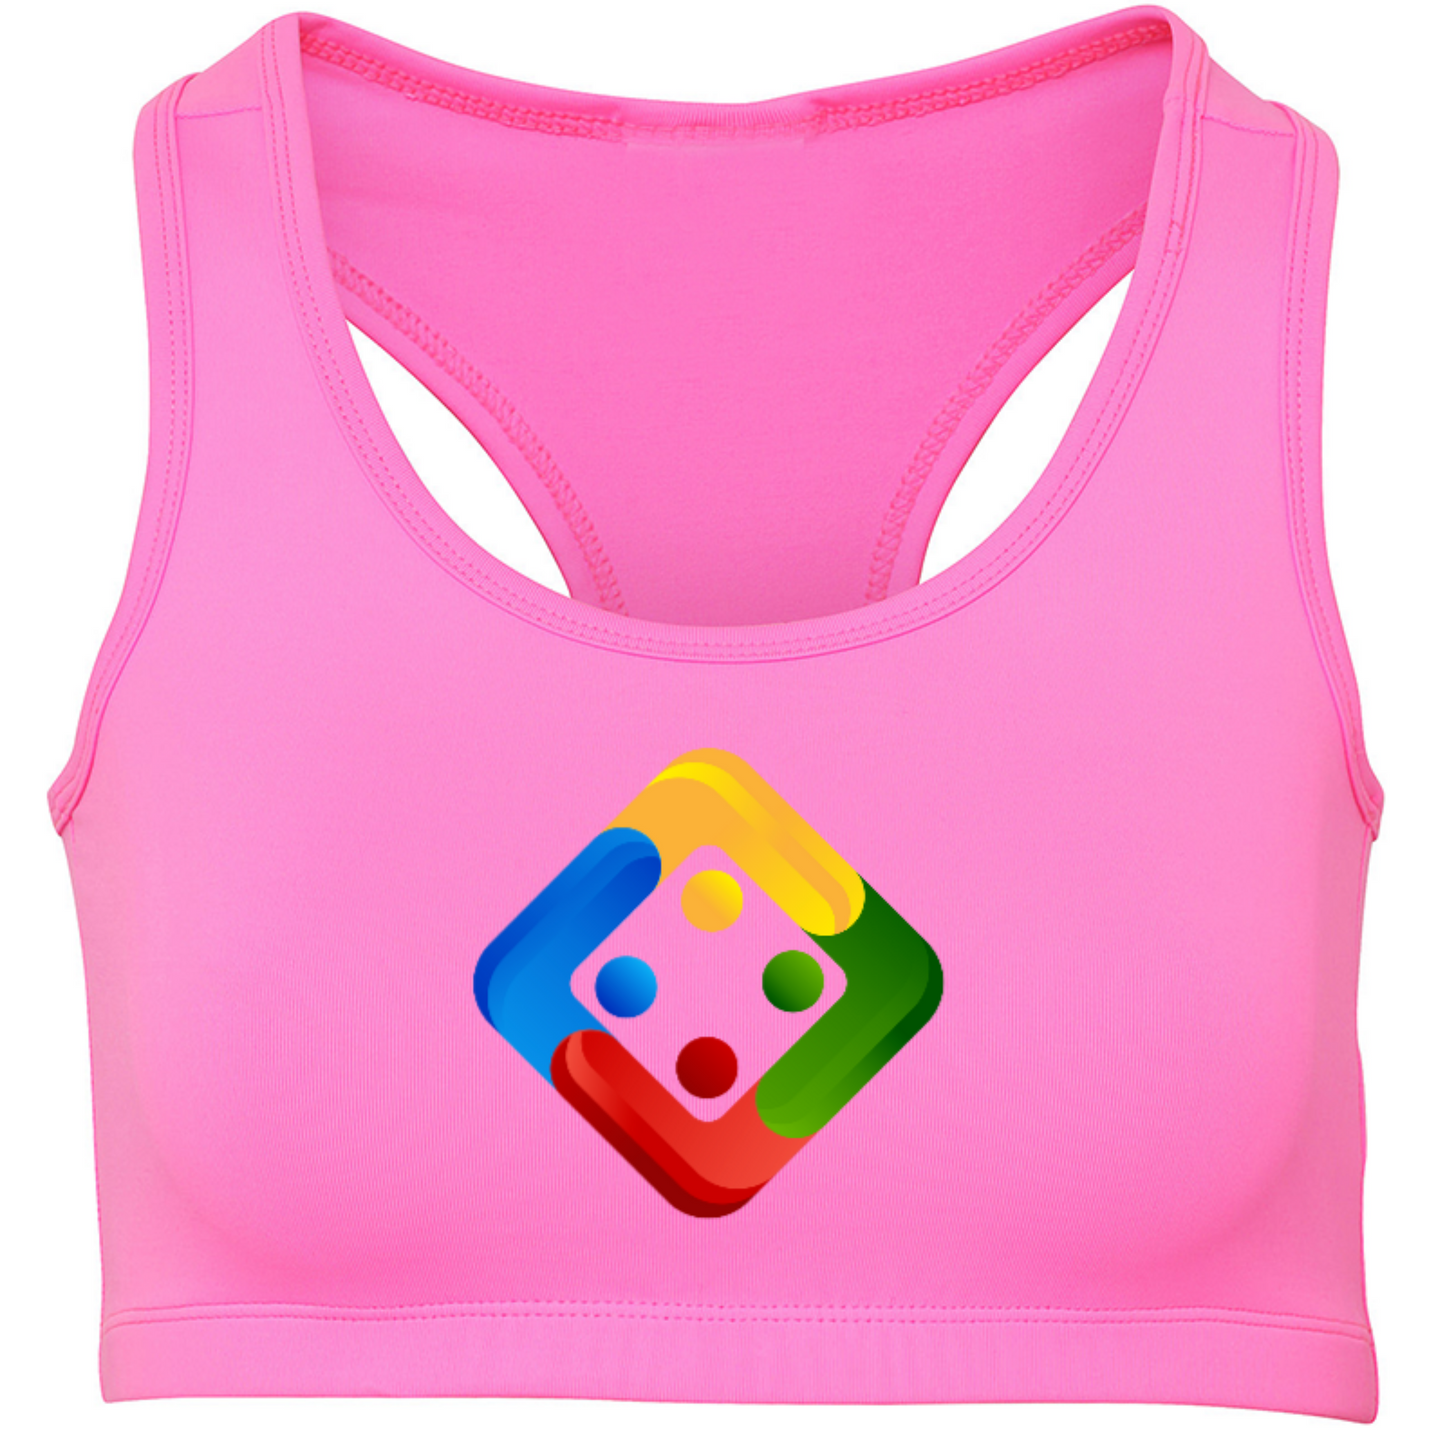 Women's crop top with printed Uckers emblem. Available in 4 colours.